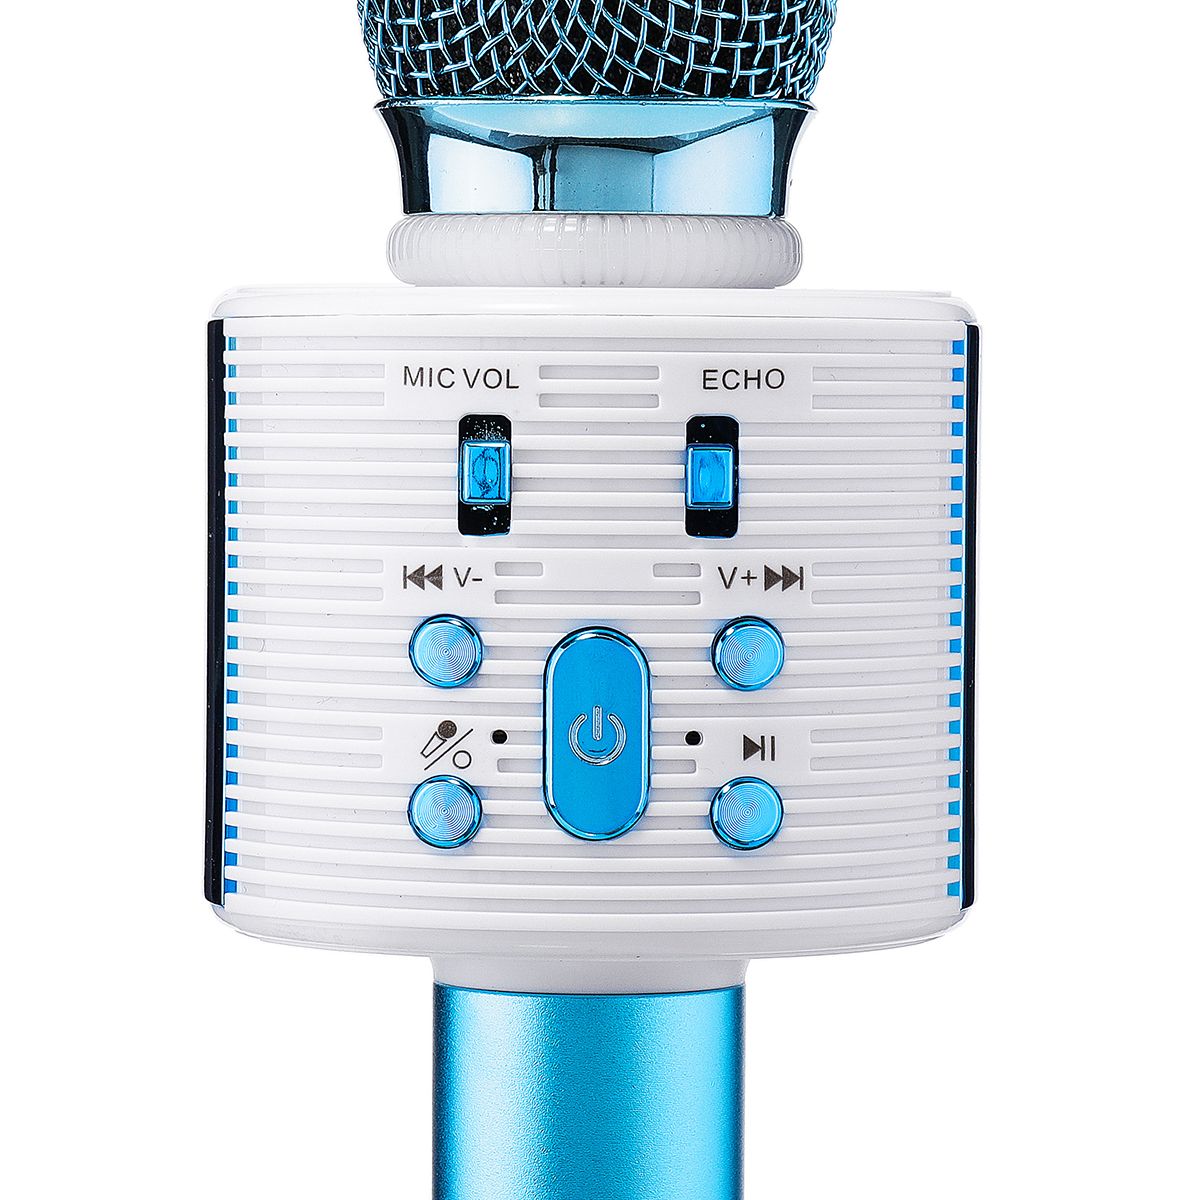 V6-bluetooth-Microphone-for-Android-IOS-Mobile-Phone-KTV-Live-Broadcast-Mic-Speaker-1484308